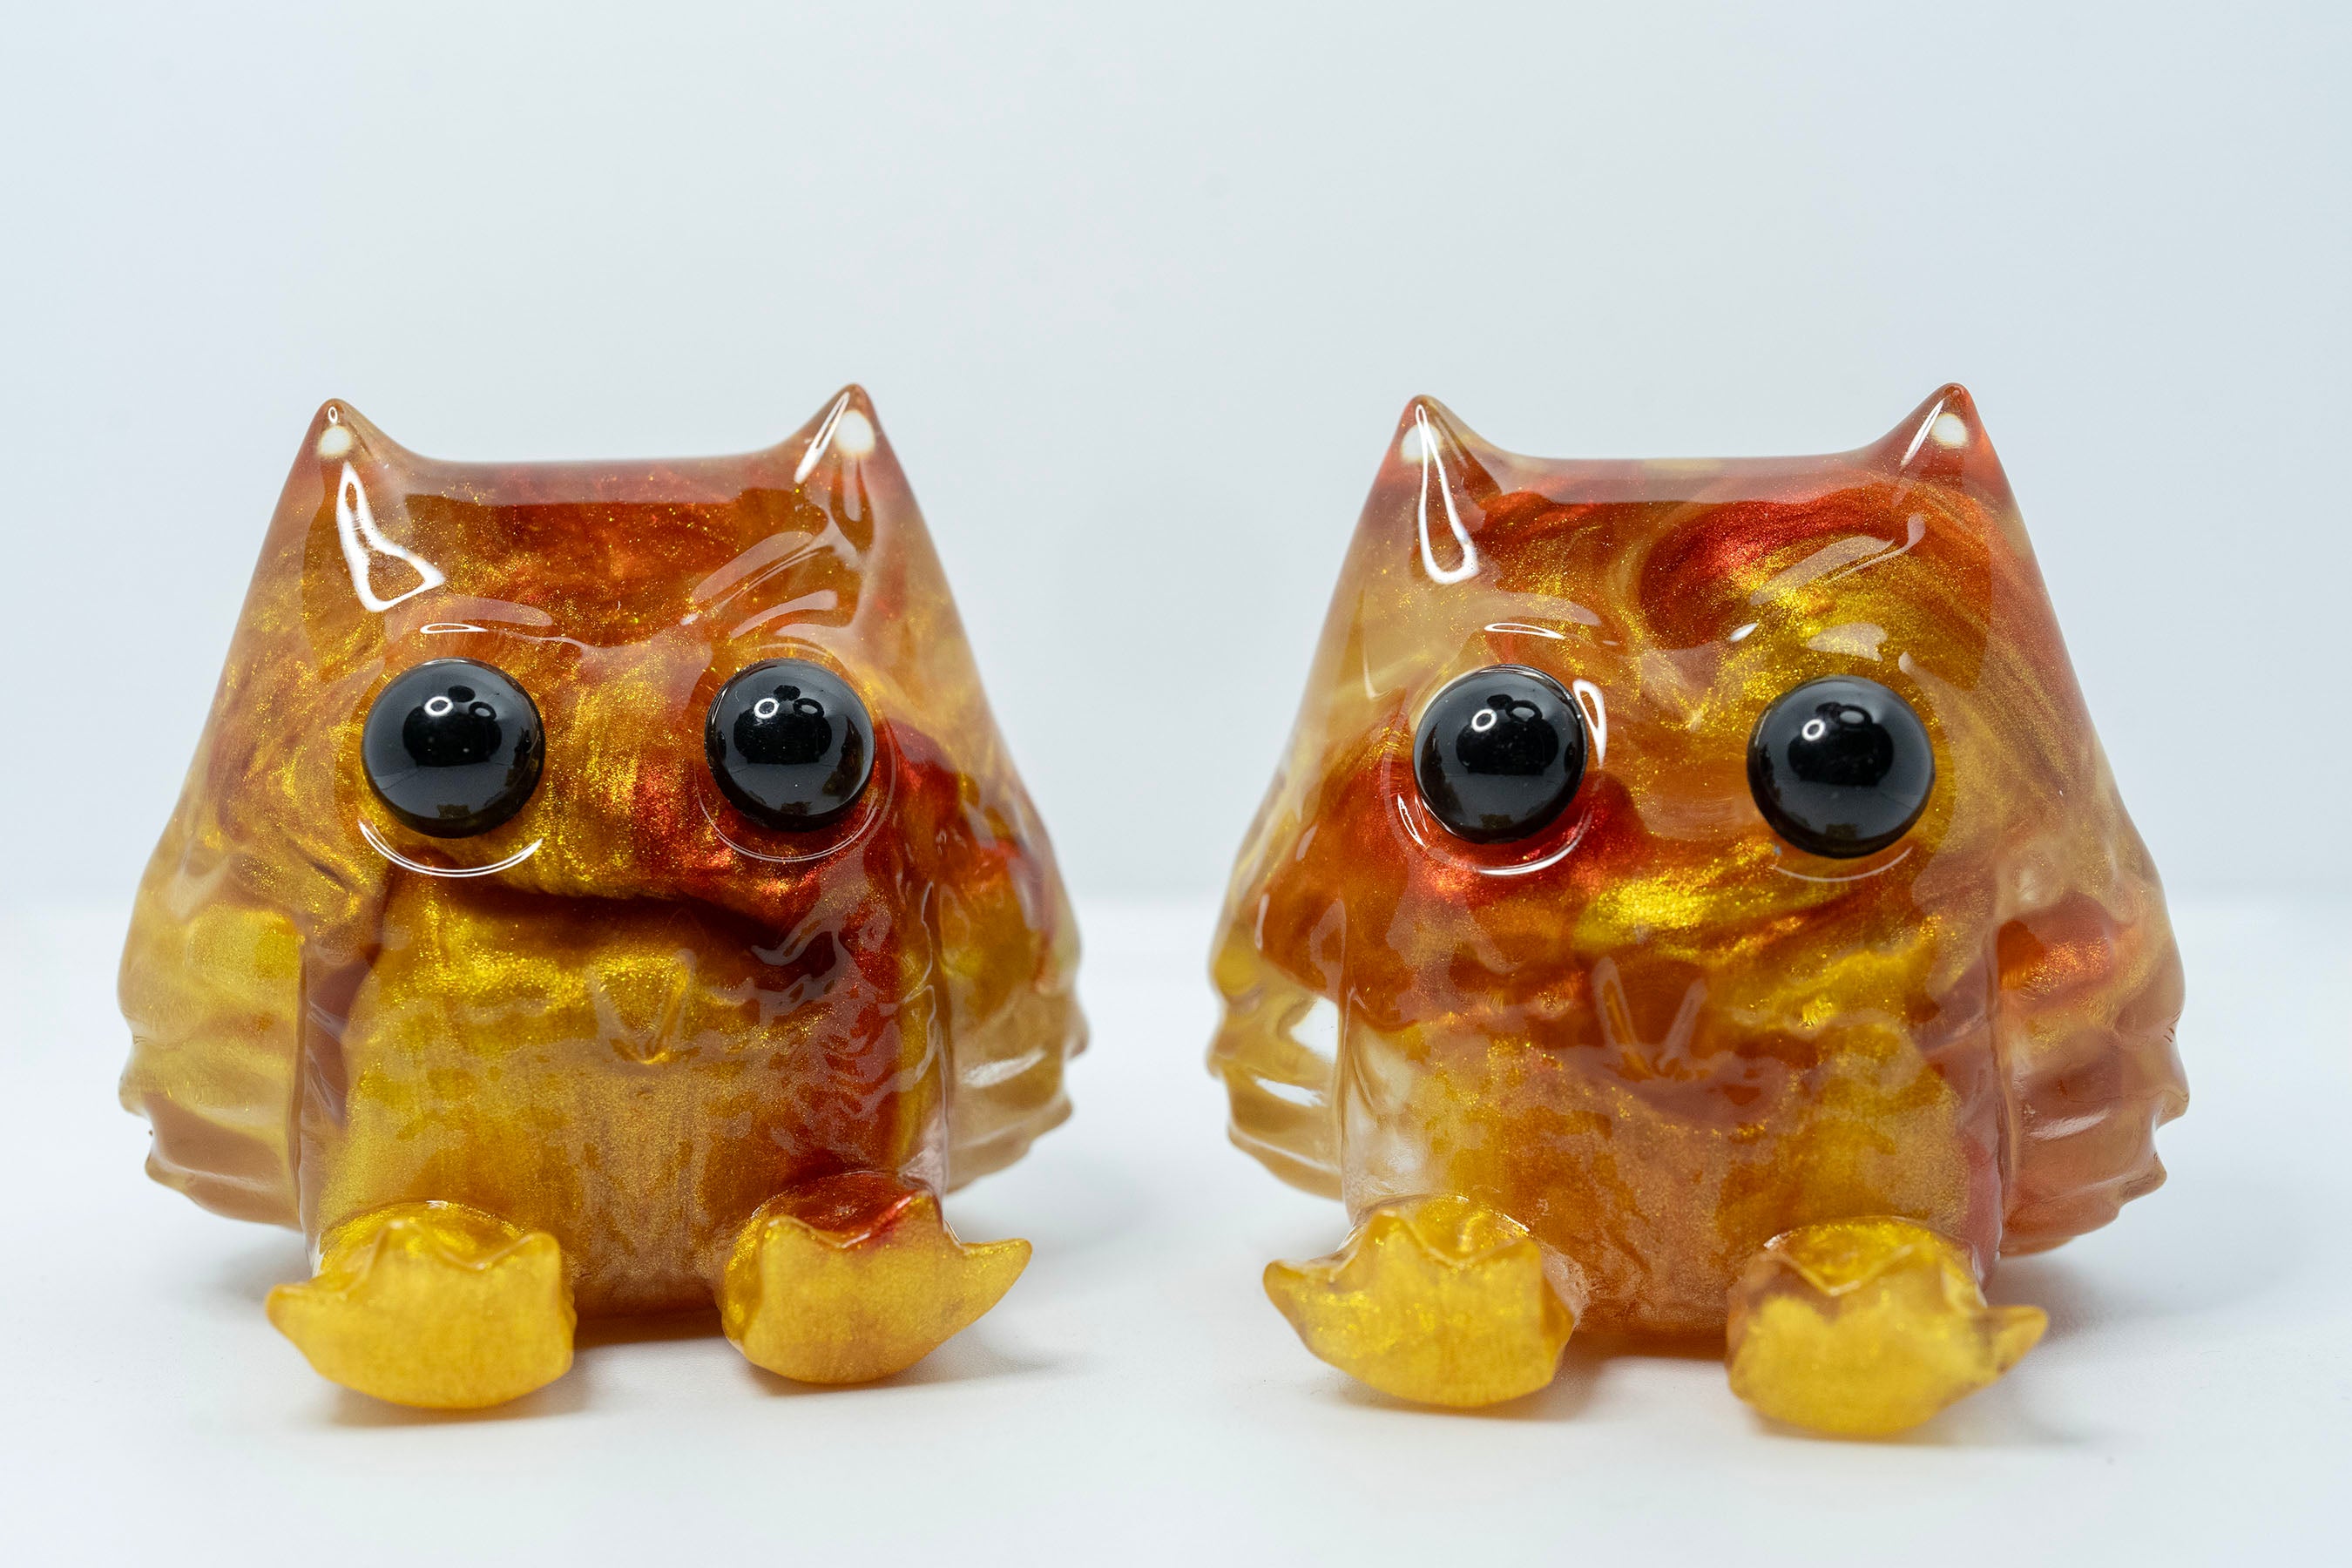 Resin toy owl figurine, part of the Little Shit Big Deal - Sitzend Wyze collection by House of Wyze. Limited edition of 5 pieces, ships randomly.